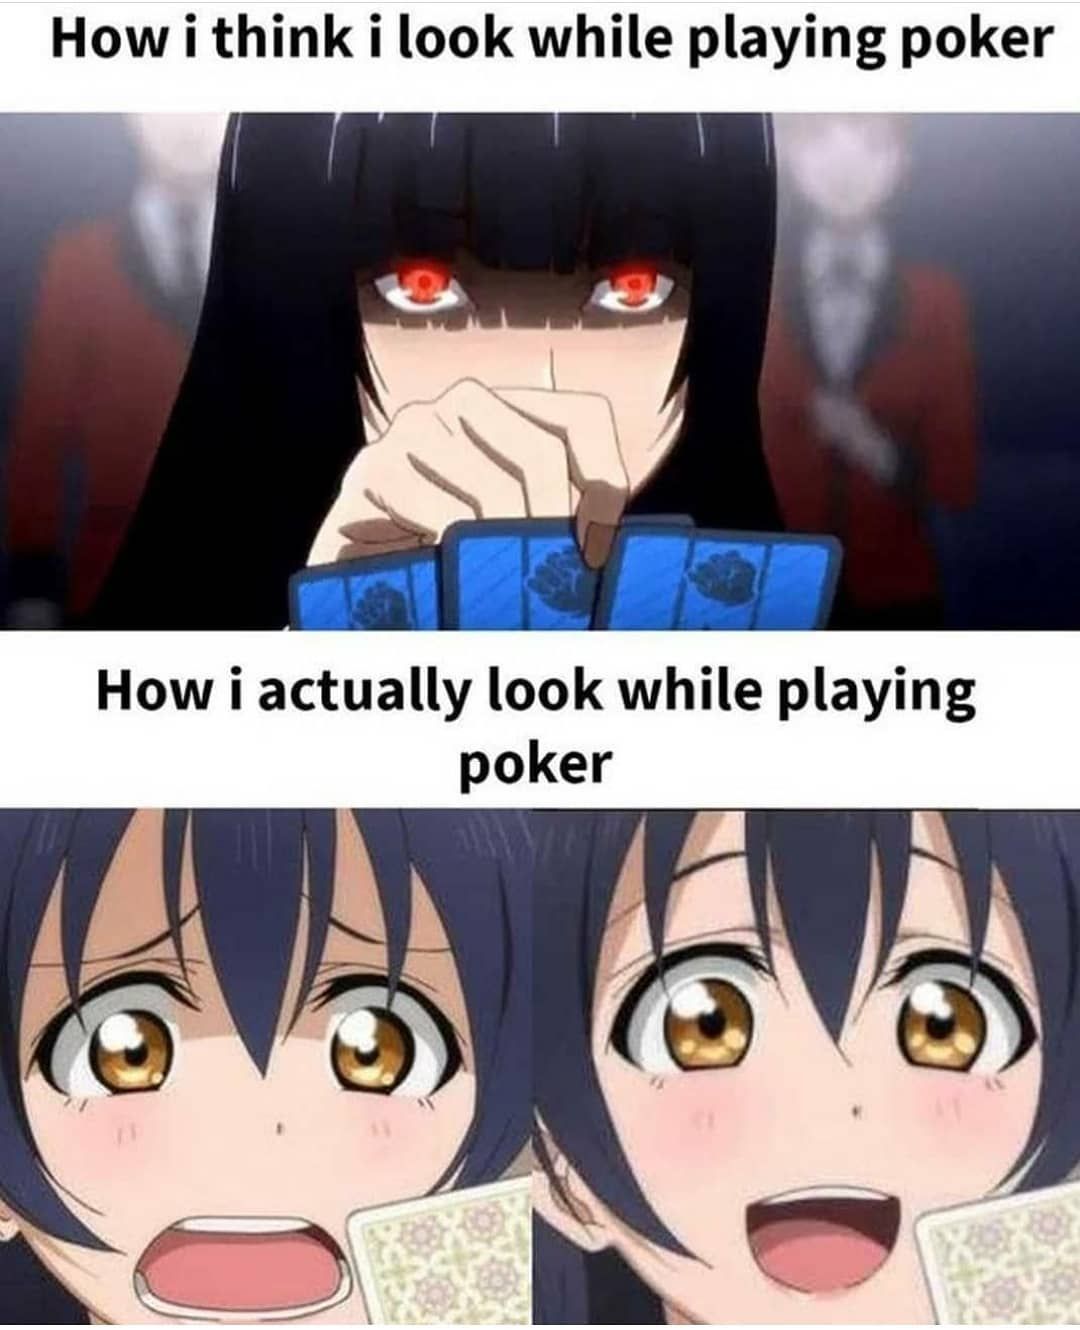 How I look when playing poker vs when I’m playing YuGiOh